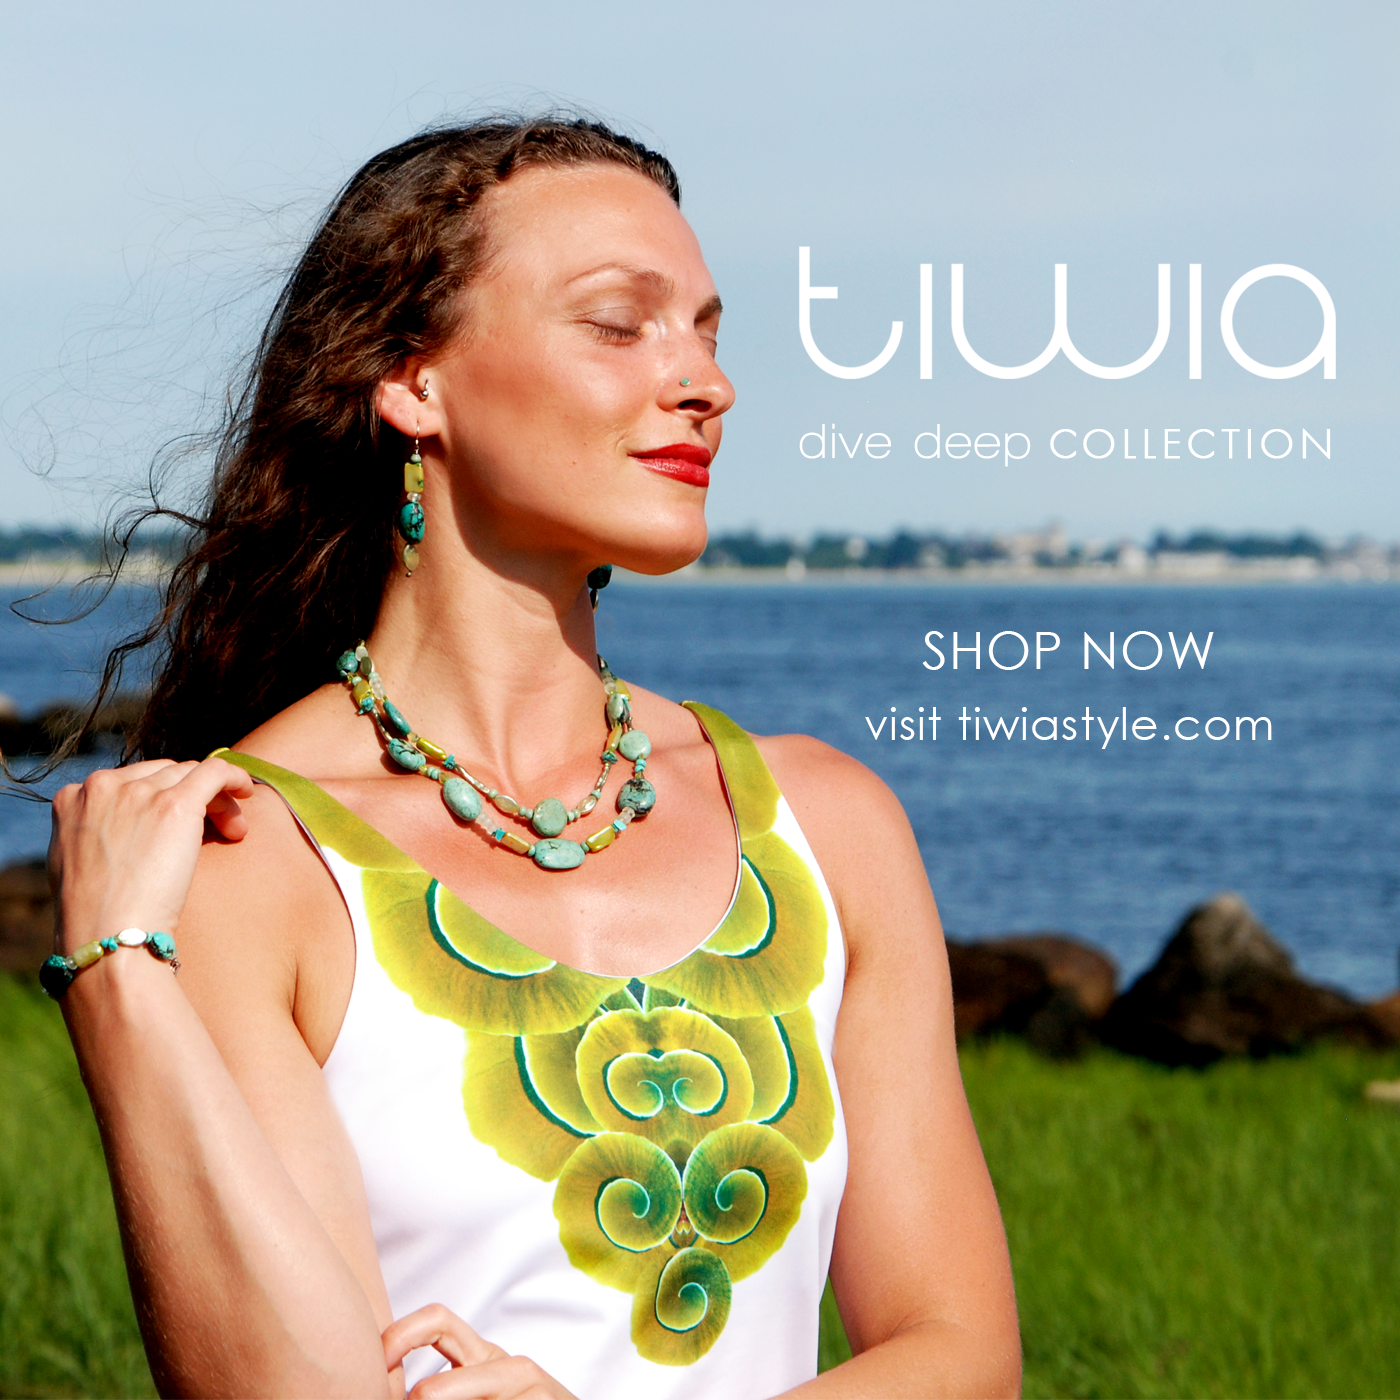 tiwia dive deep ad instagram emily close scoop neck jewelry.png